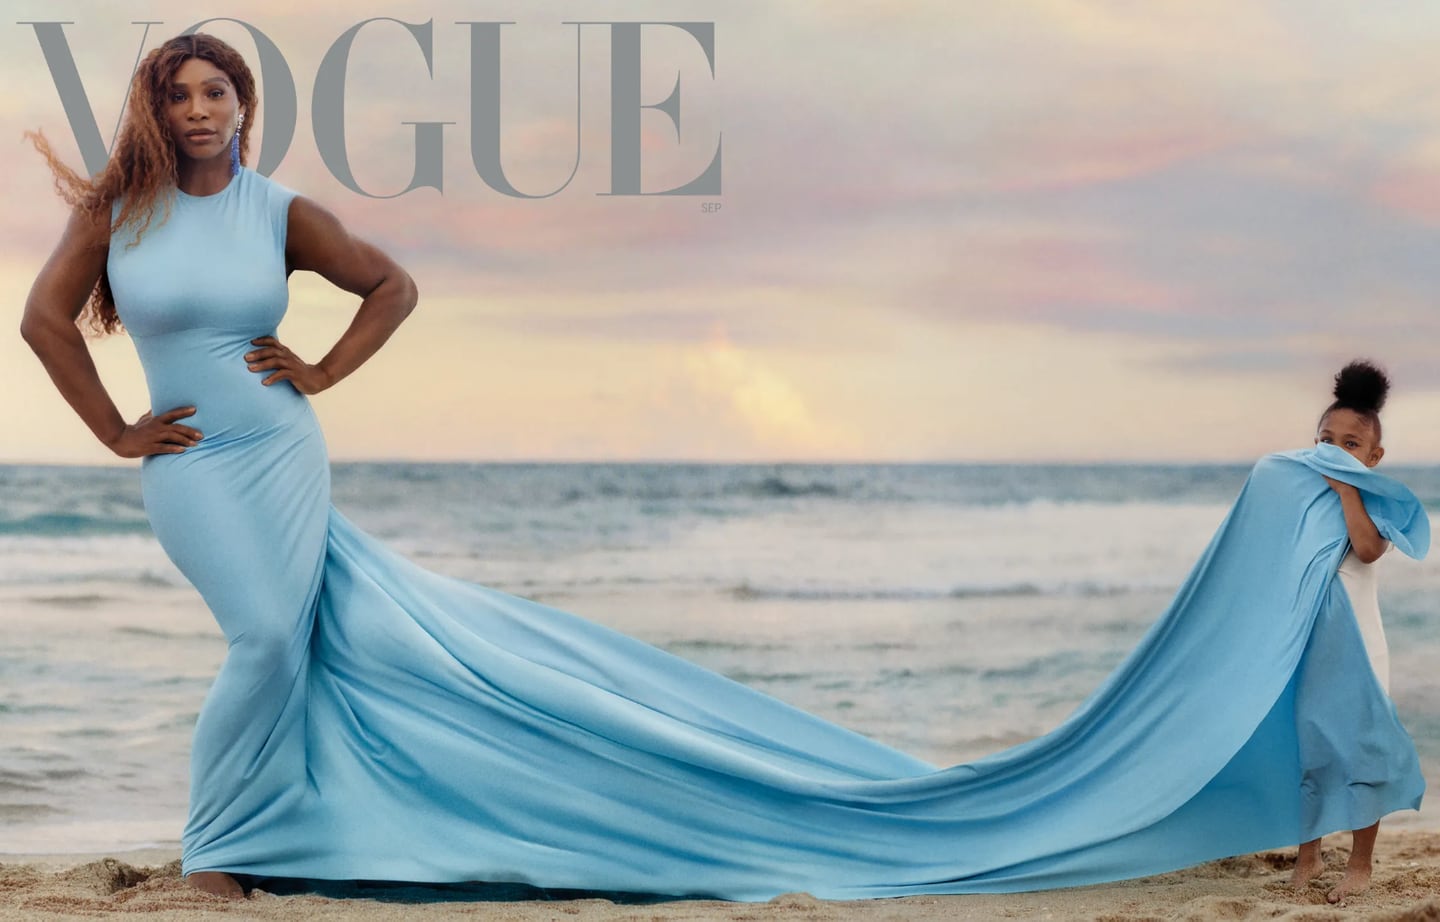 Serena Williams stars on the front cover of Vogue's September 2022 issue. She wears a blue gown with a long train held by her daughter on a beach, in front of a sunset.